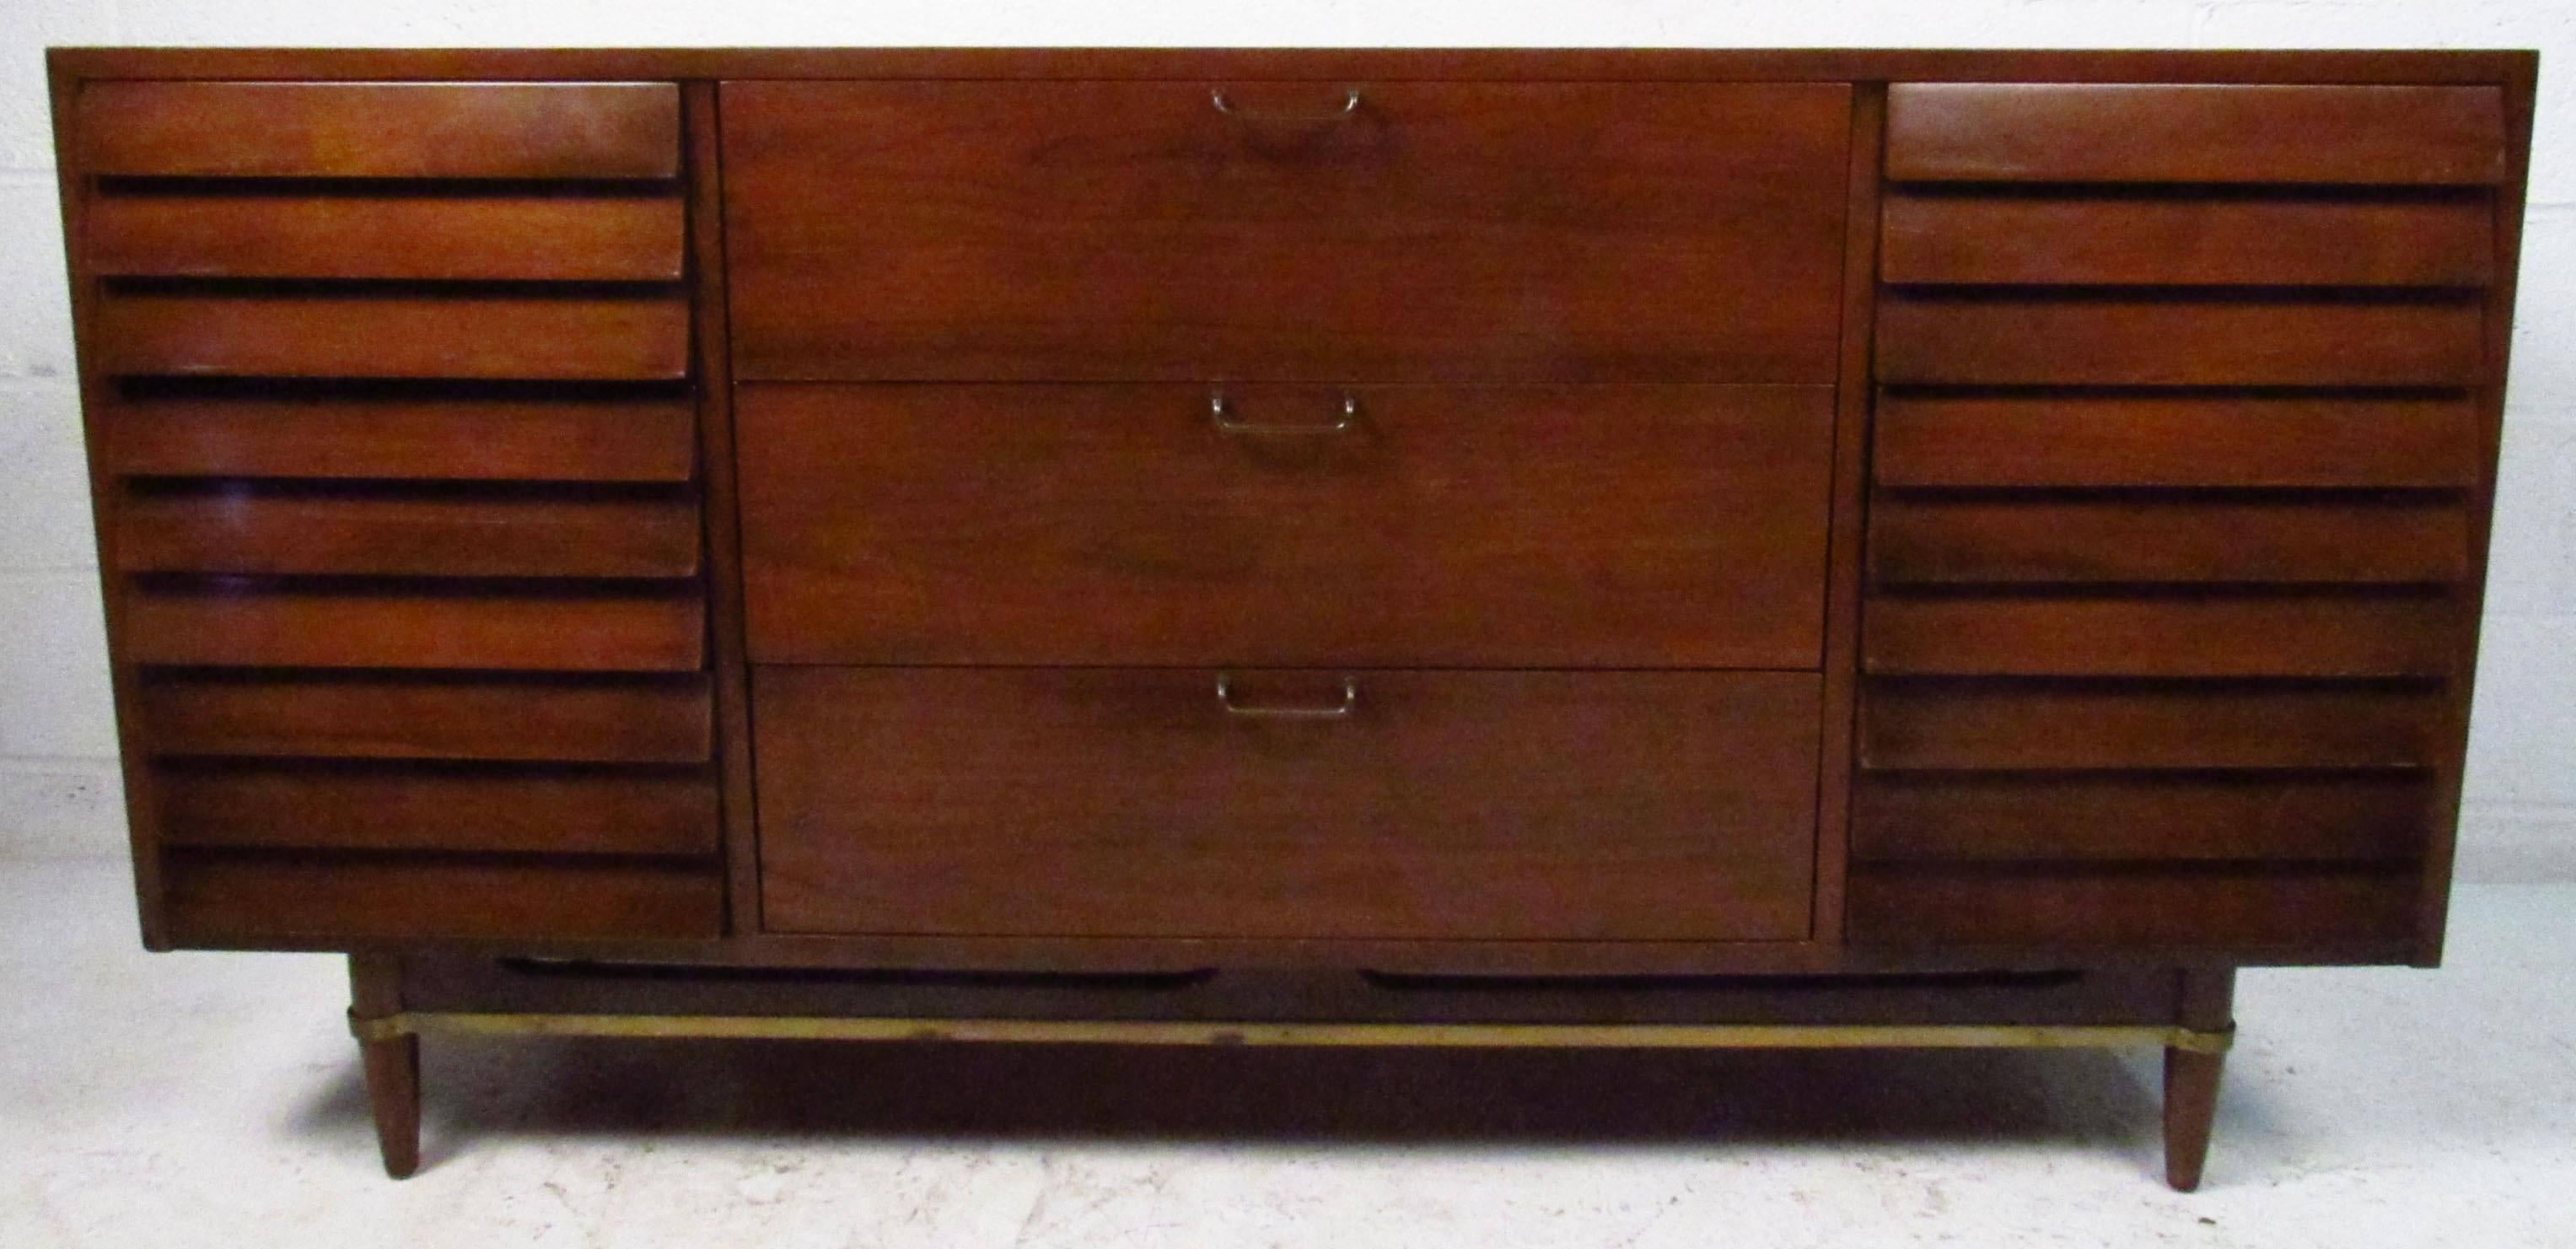 This stylish vintage modern dresser features louvered front with brass trim and sculpted handles. Designed in the 1970s by Merton Gershun for American of Martinsville, this unique nine drawer bedroom dresser makes an impressive addition to any